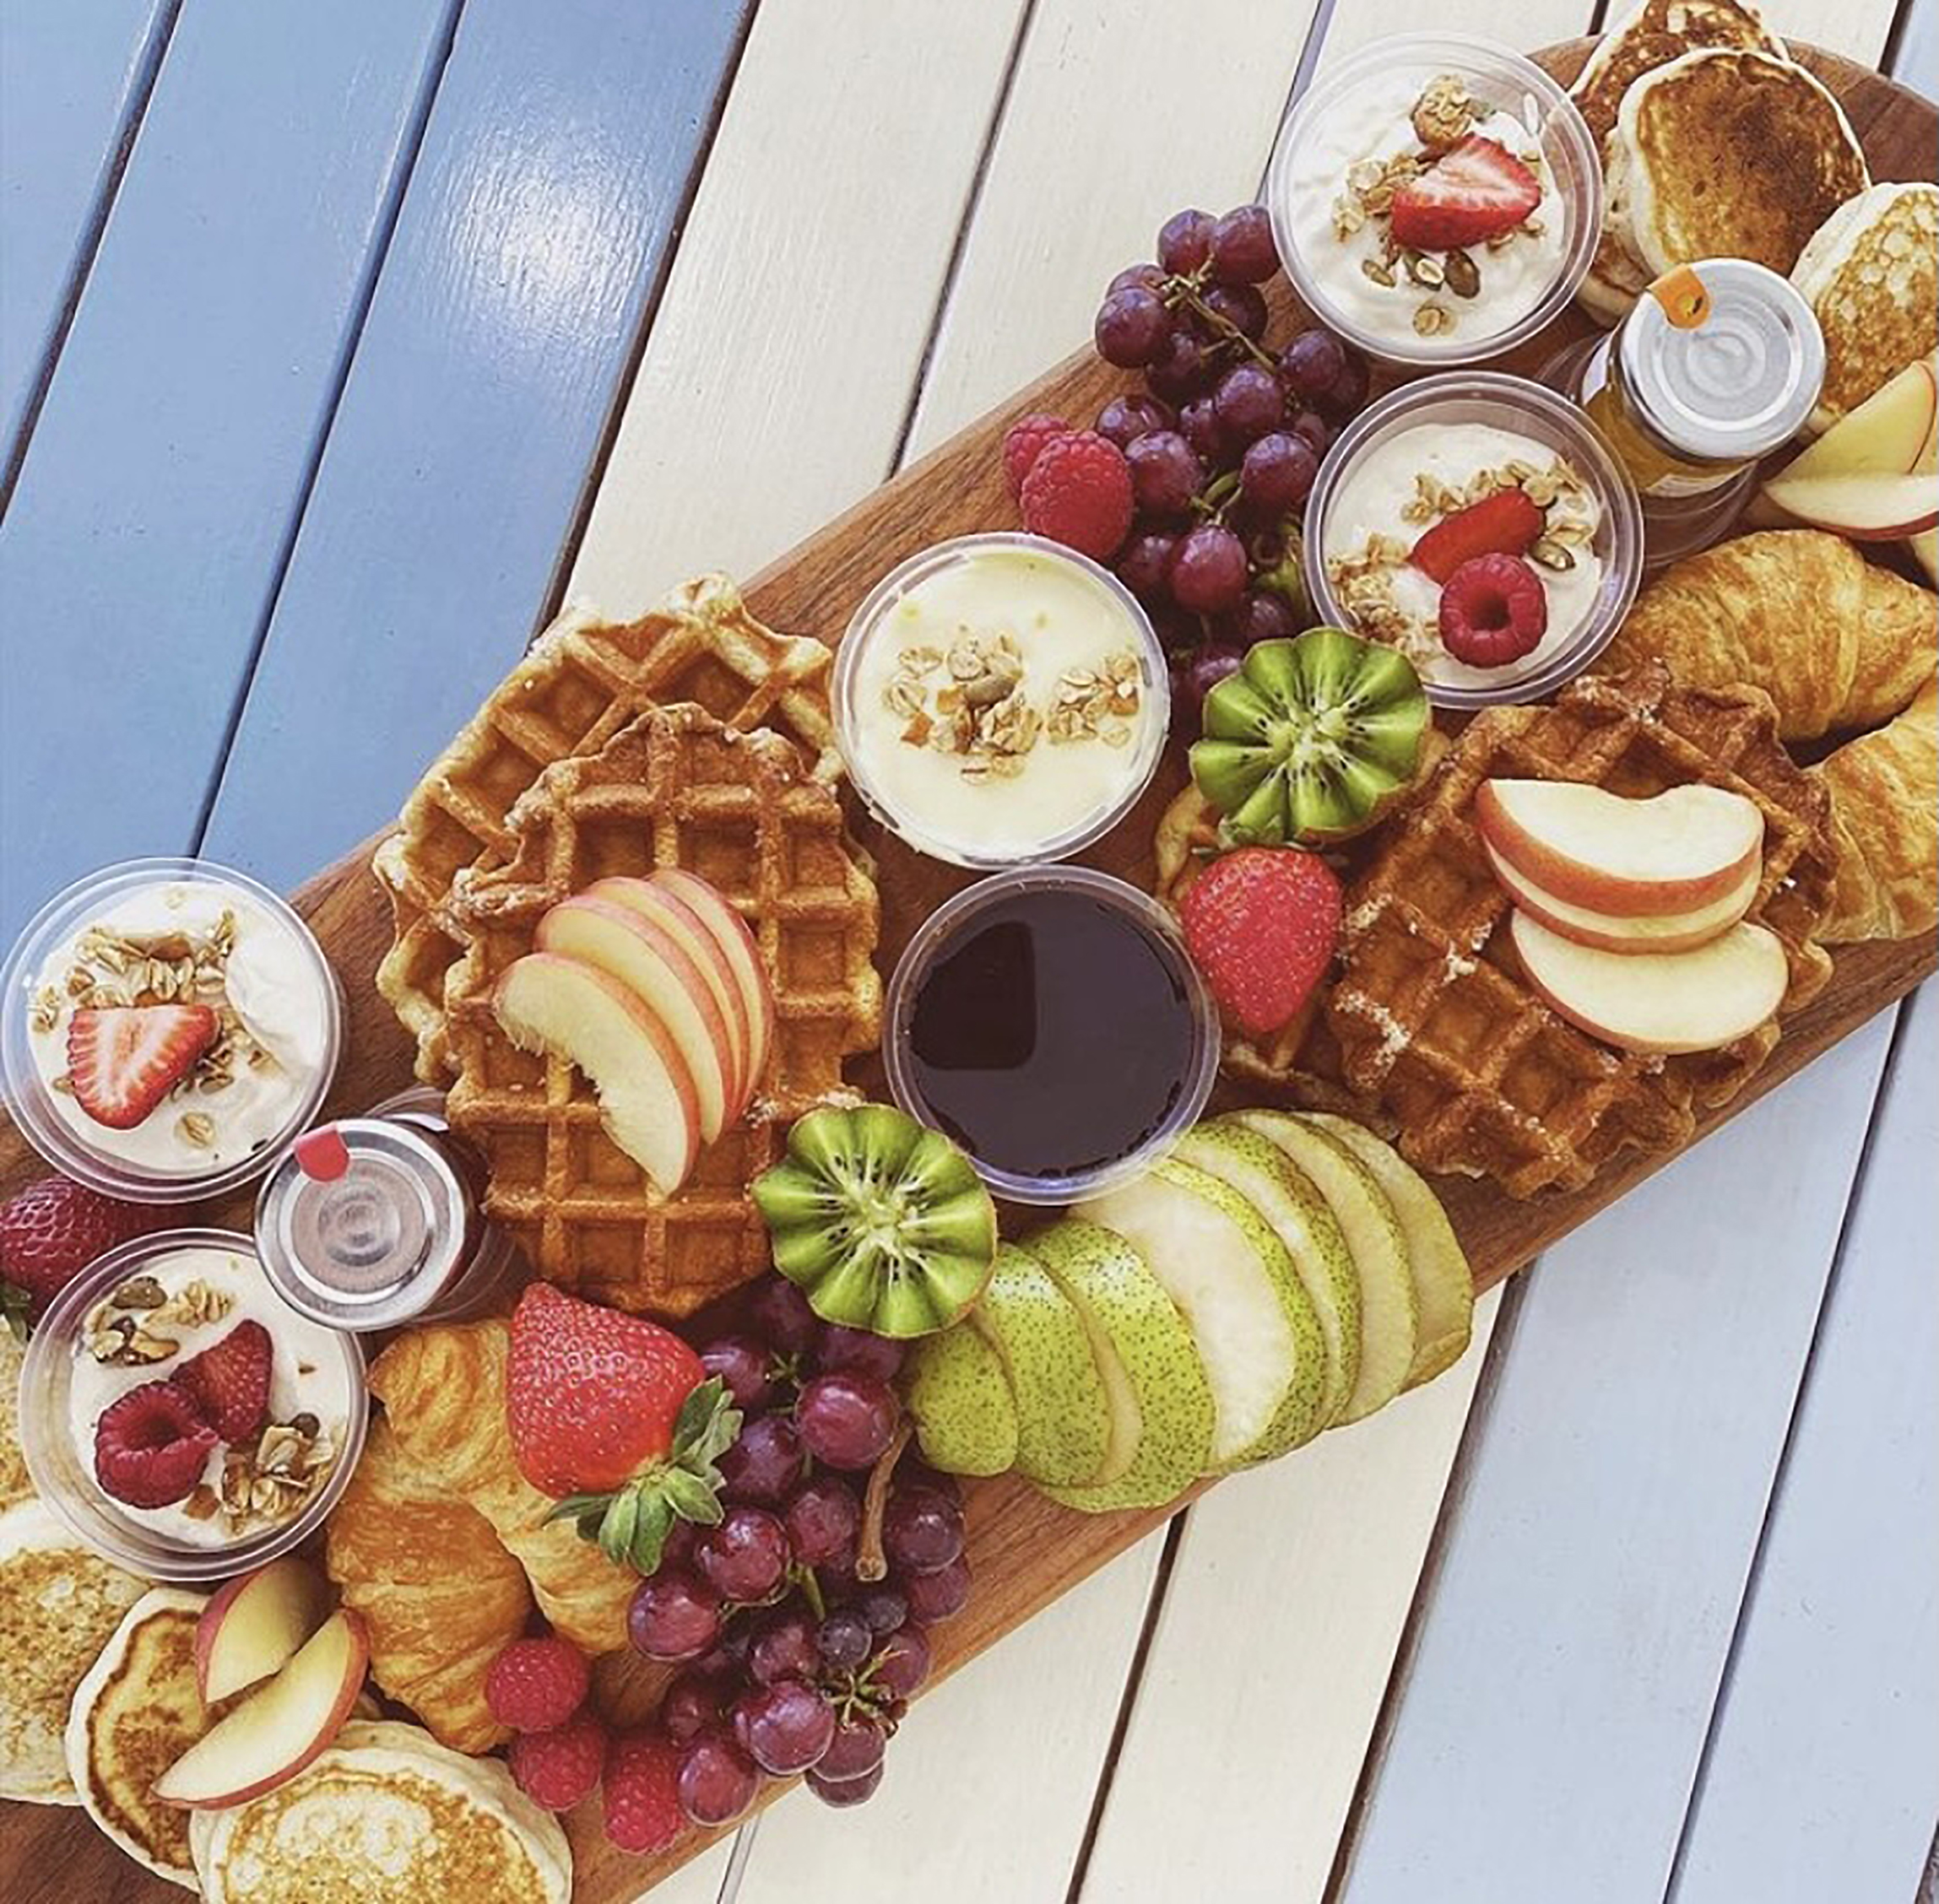 a colourful platter of breakfast food including waffles fruit and yoghurt on a blue and white striped table